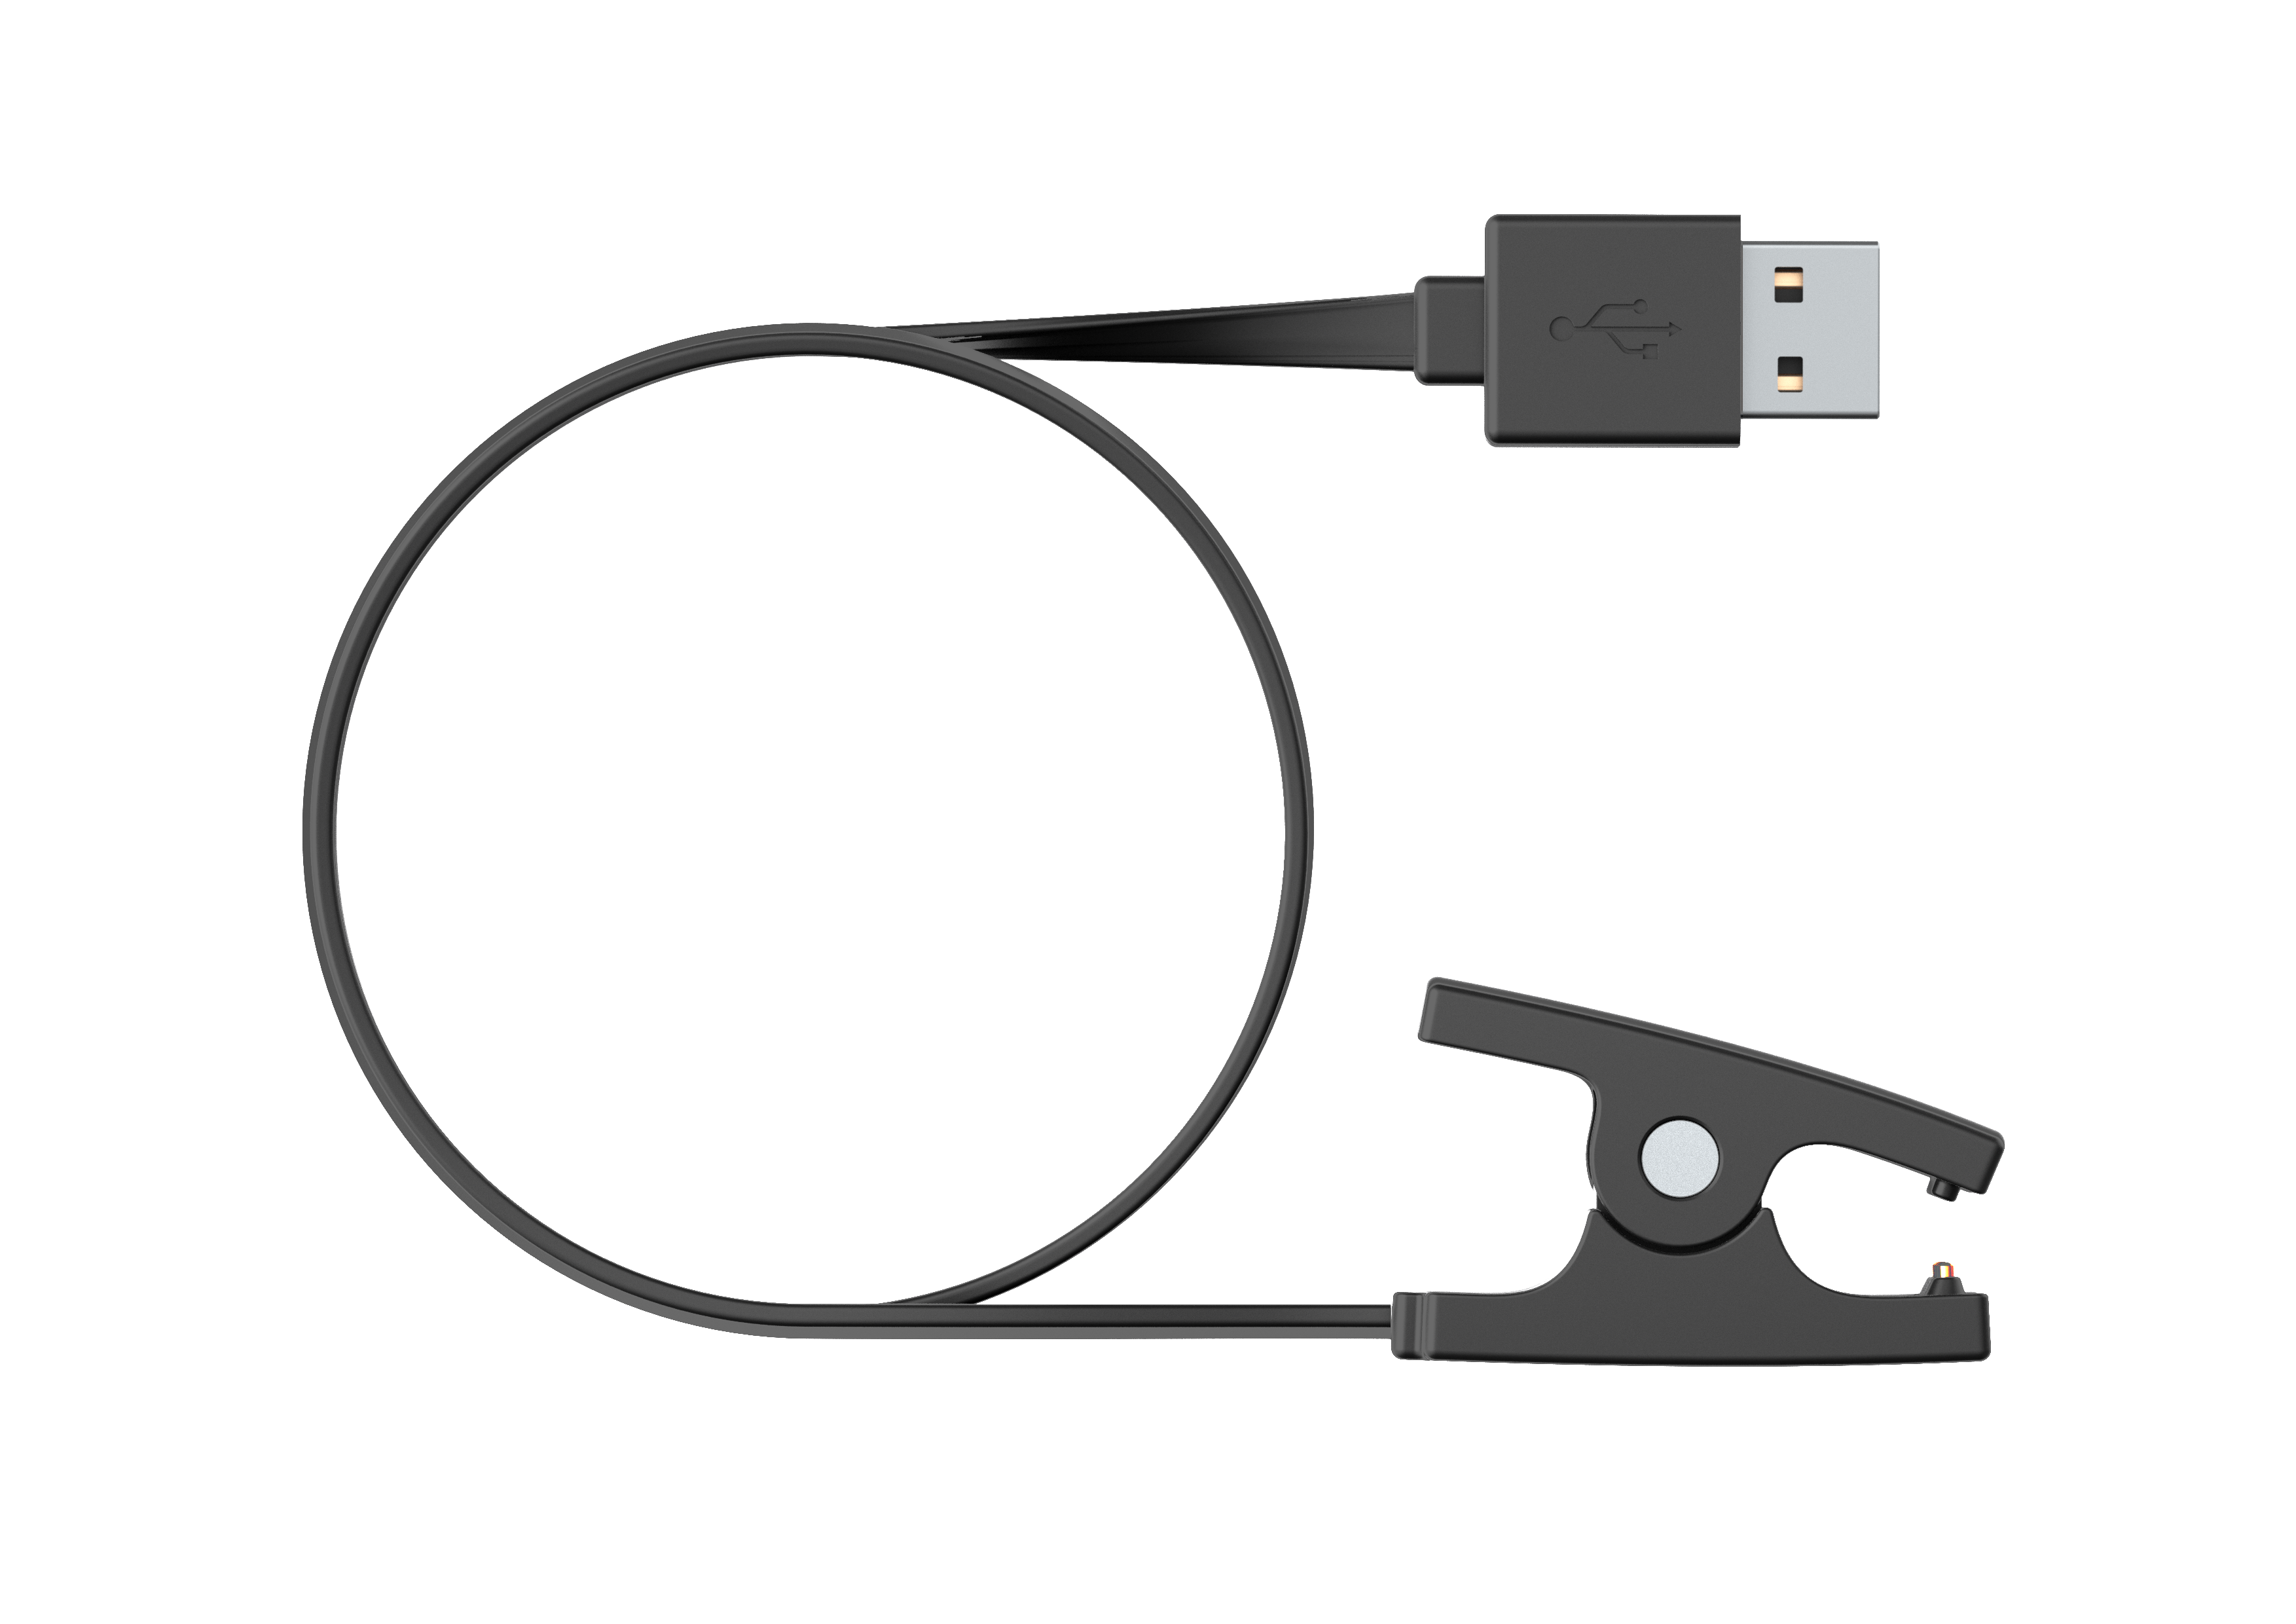 haspel Baron radium USB Power Cable – Charge and update your Suunto watch